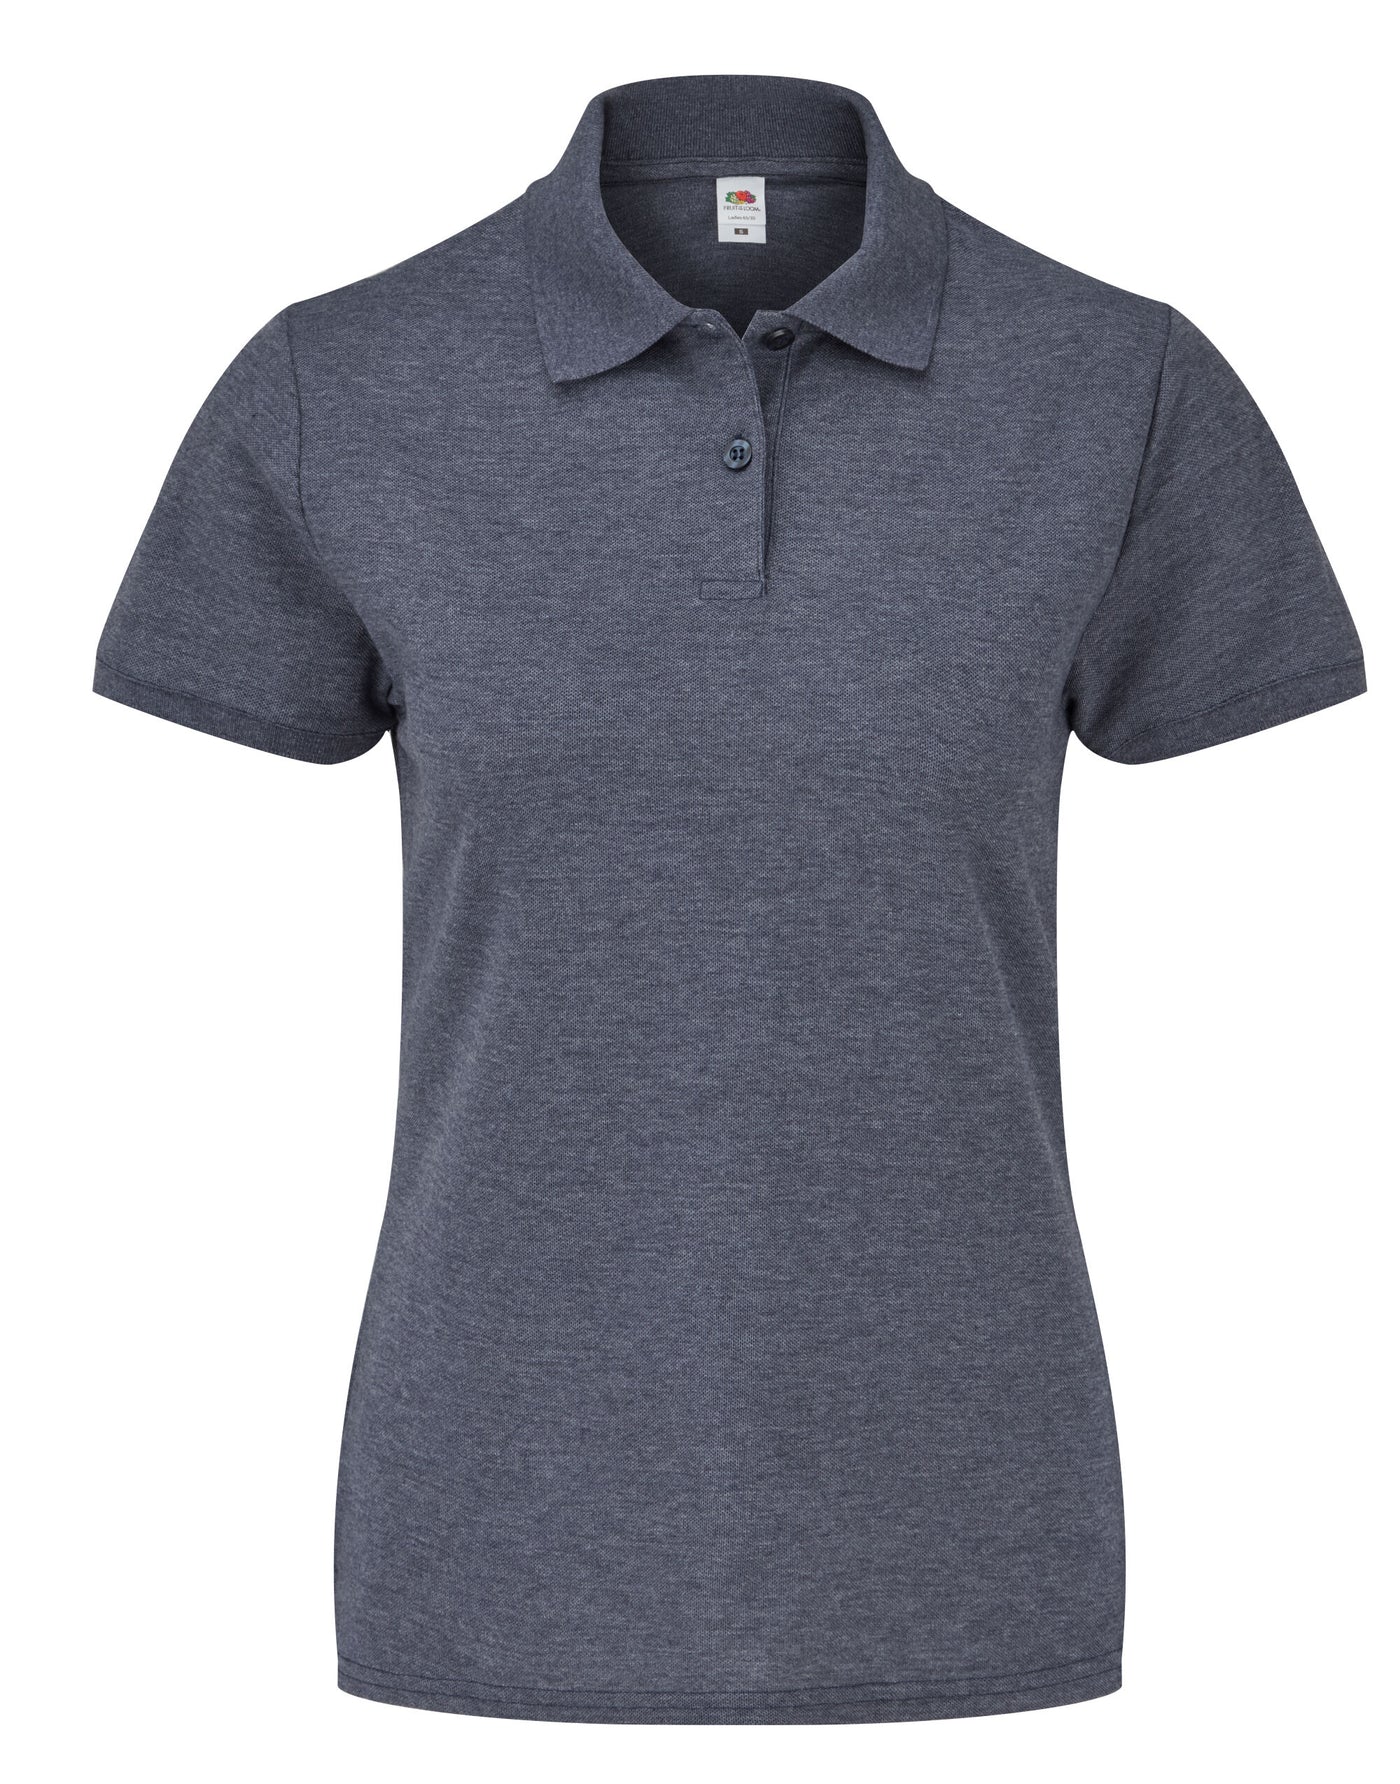 Ladies Fit Polo Shirt In Heather Navy